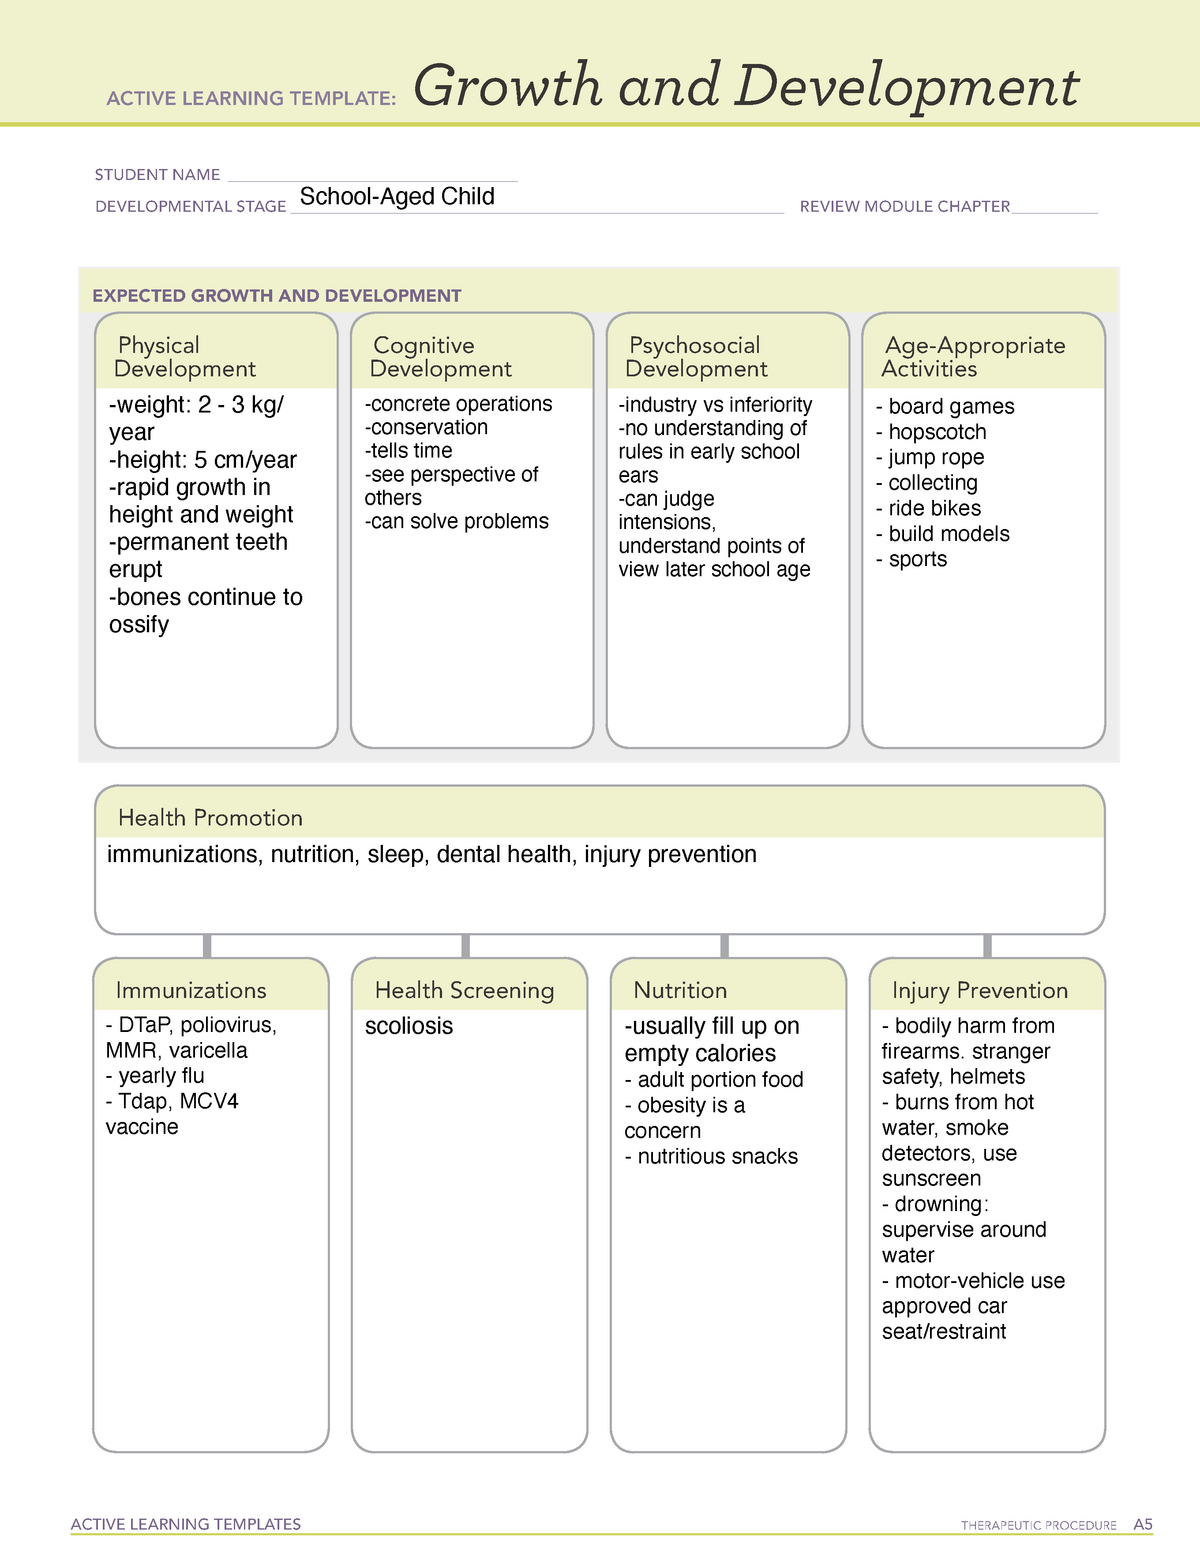 growth and development school aged child ACTIVE LEARNING TEMPLATES